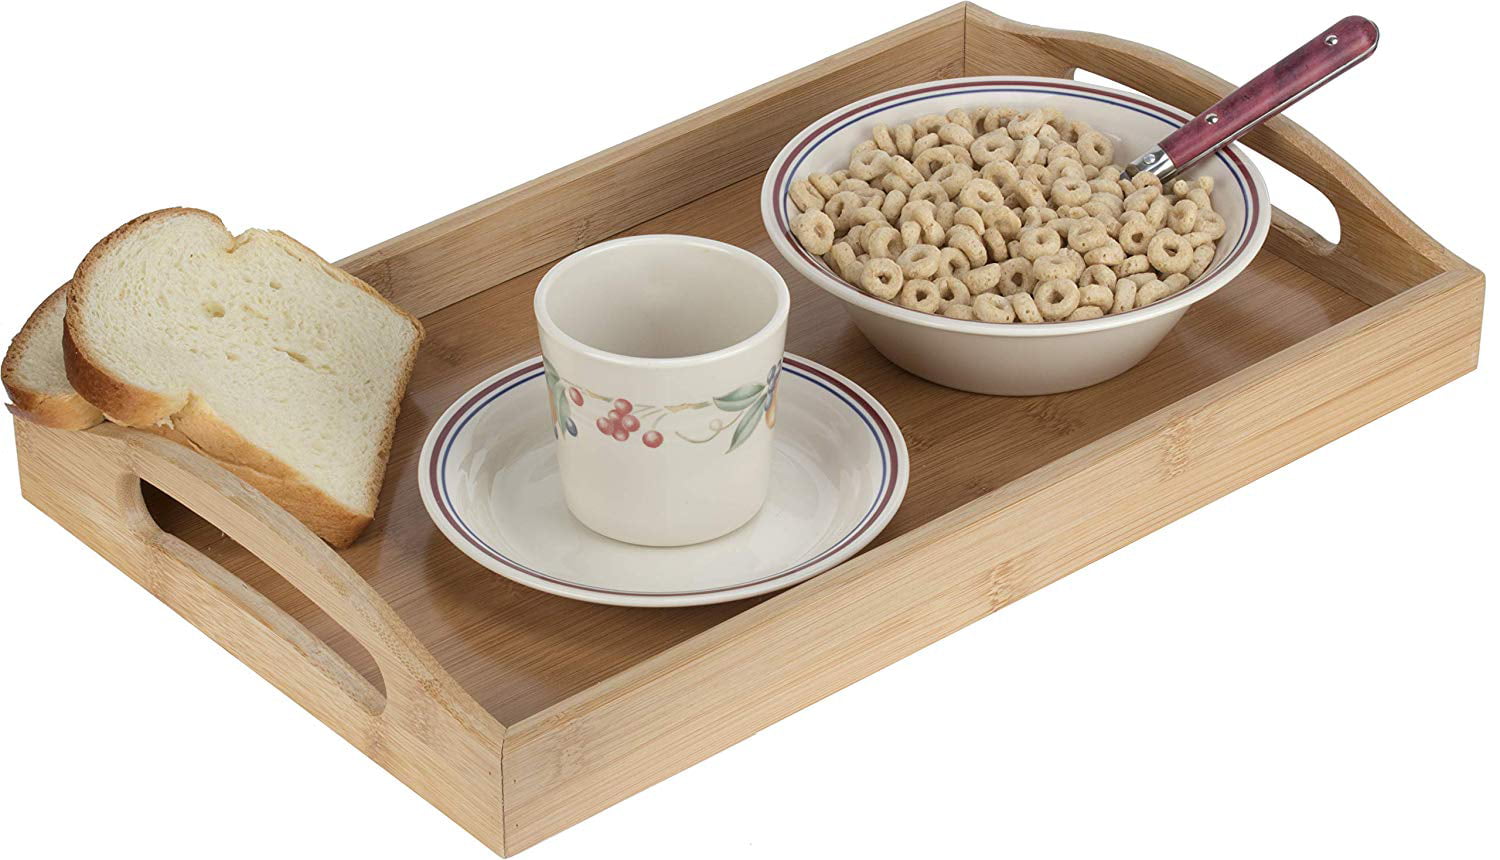 Serving Tea Breakfast Wood Kitchen Platter Bamboo Serving Tray with Handles 